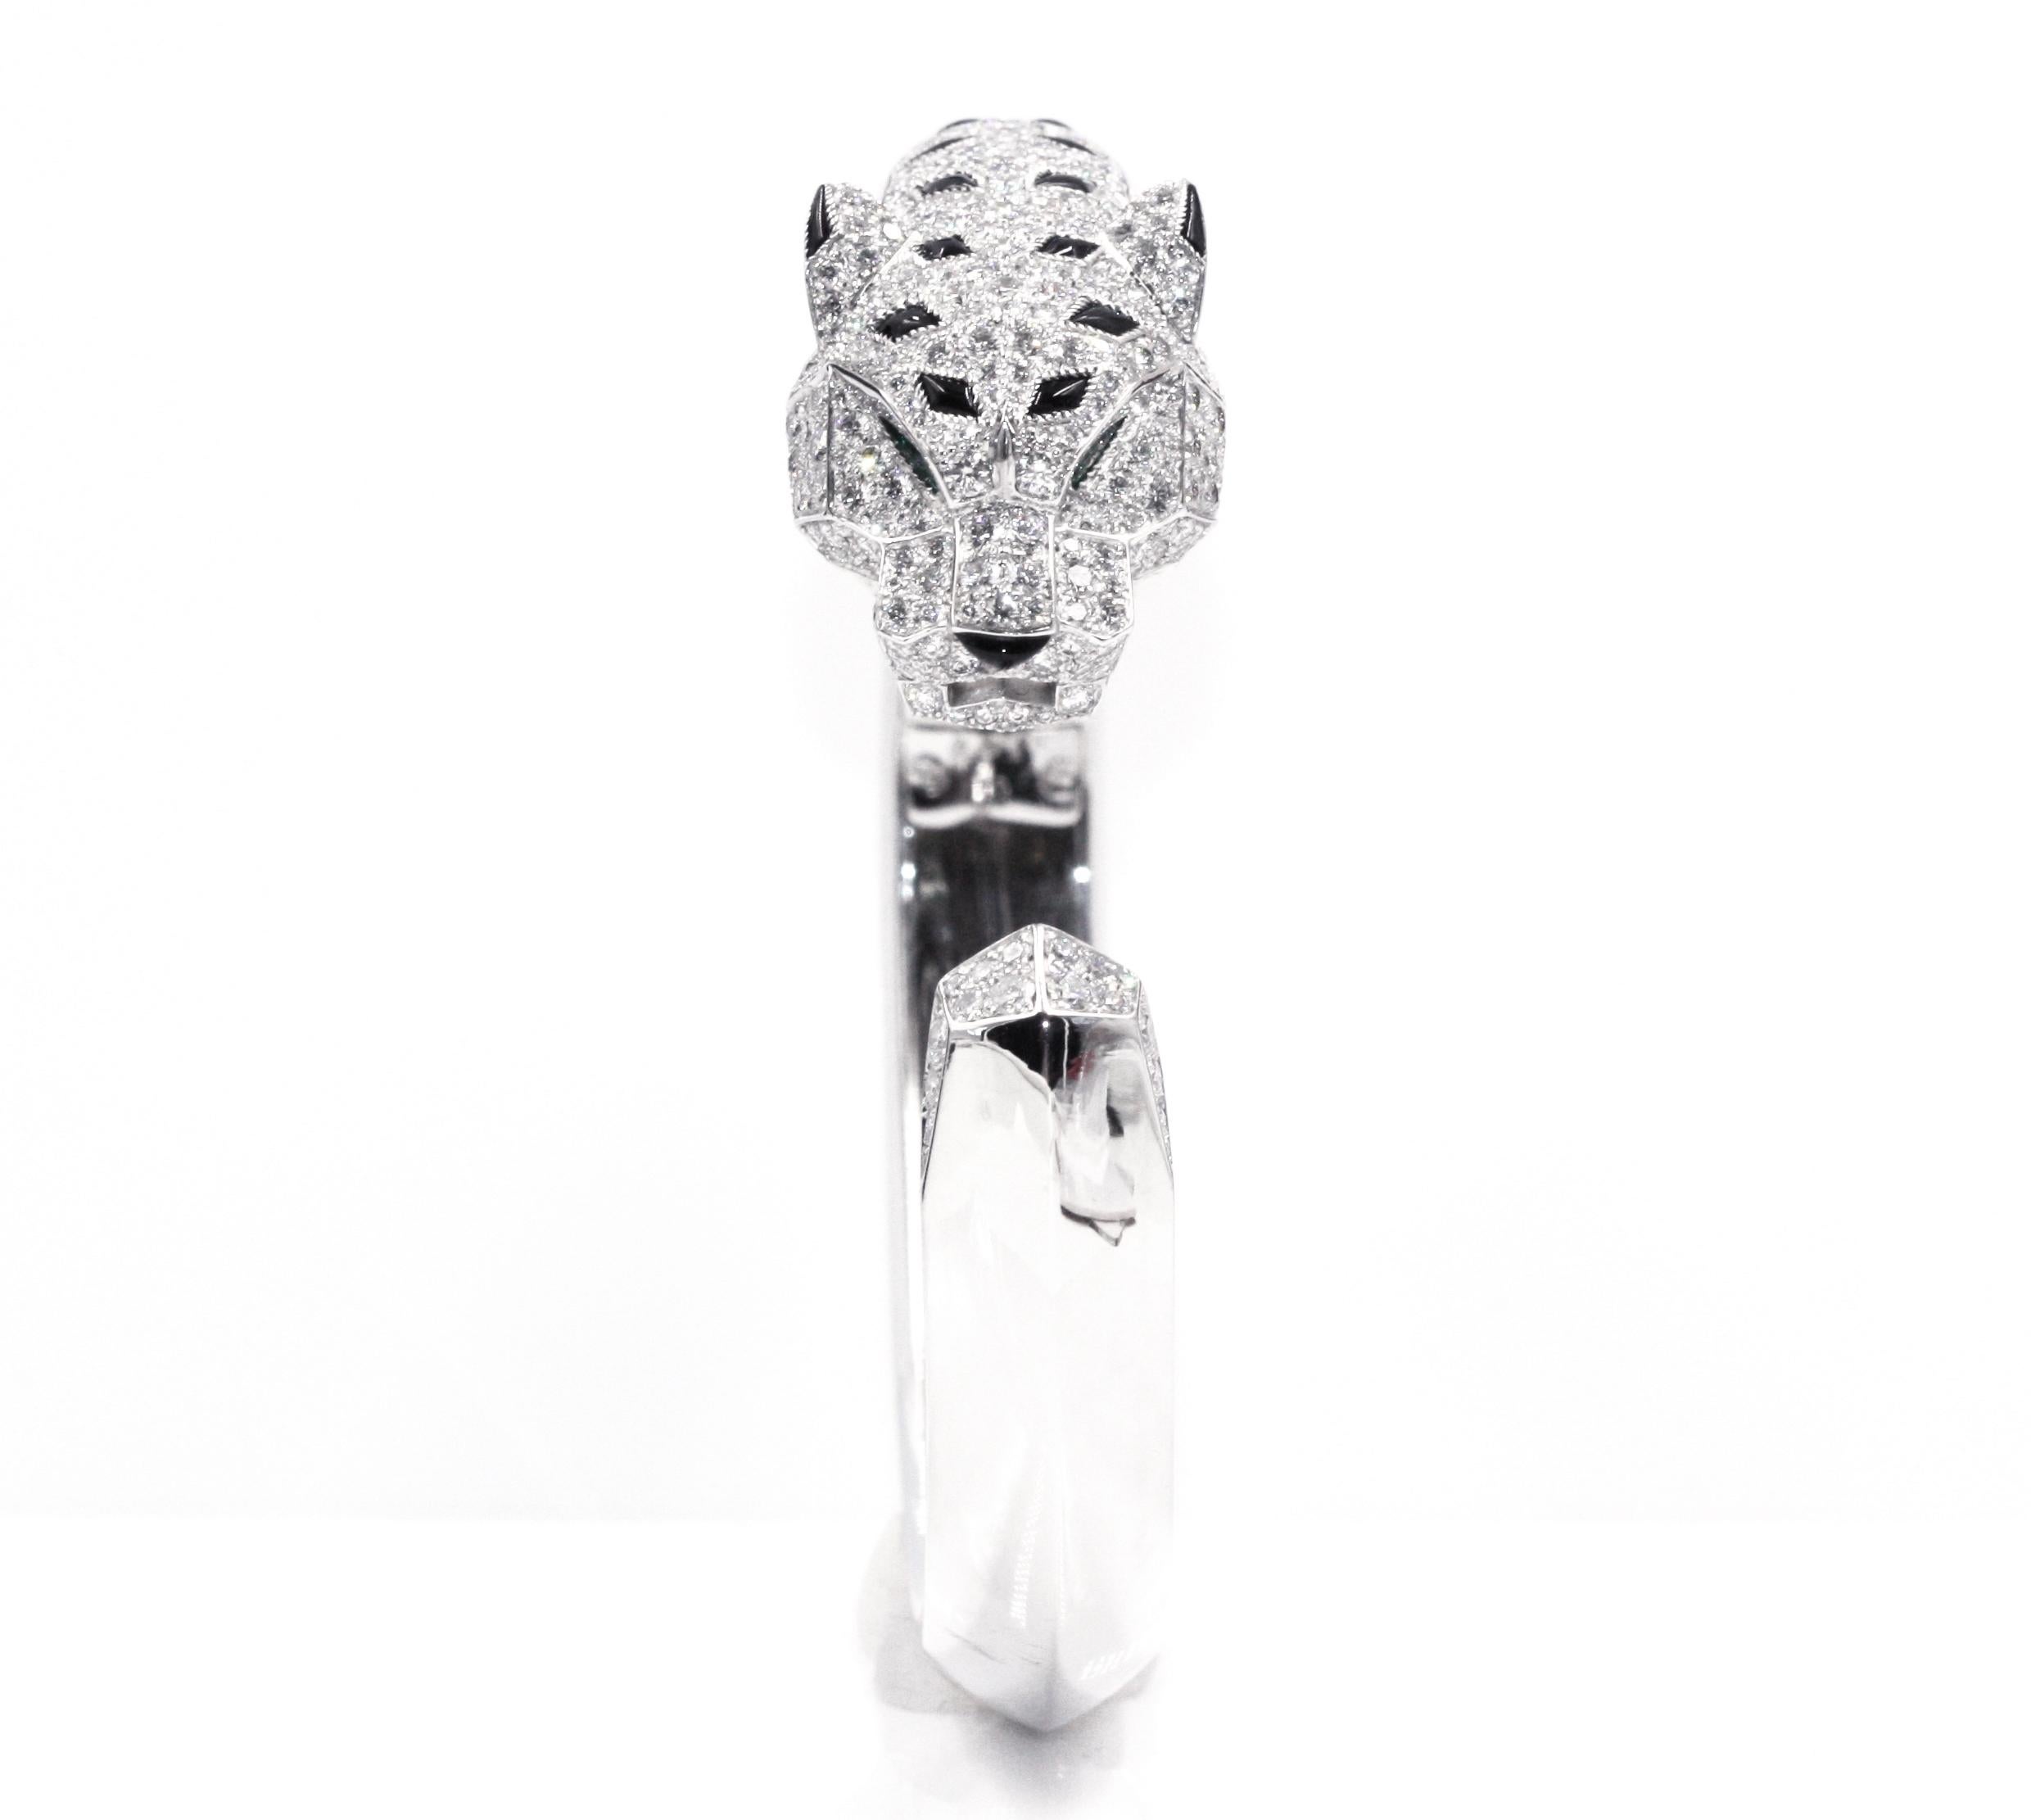 This is undoubtedly one of the most incredibly beautiful designs of the prestigious Cartier brand, the animal that represents this brand, the panther, made with white gold and 360 diamonds, makes this bracelet completely outstanding among all those